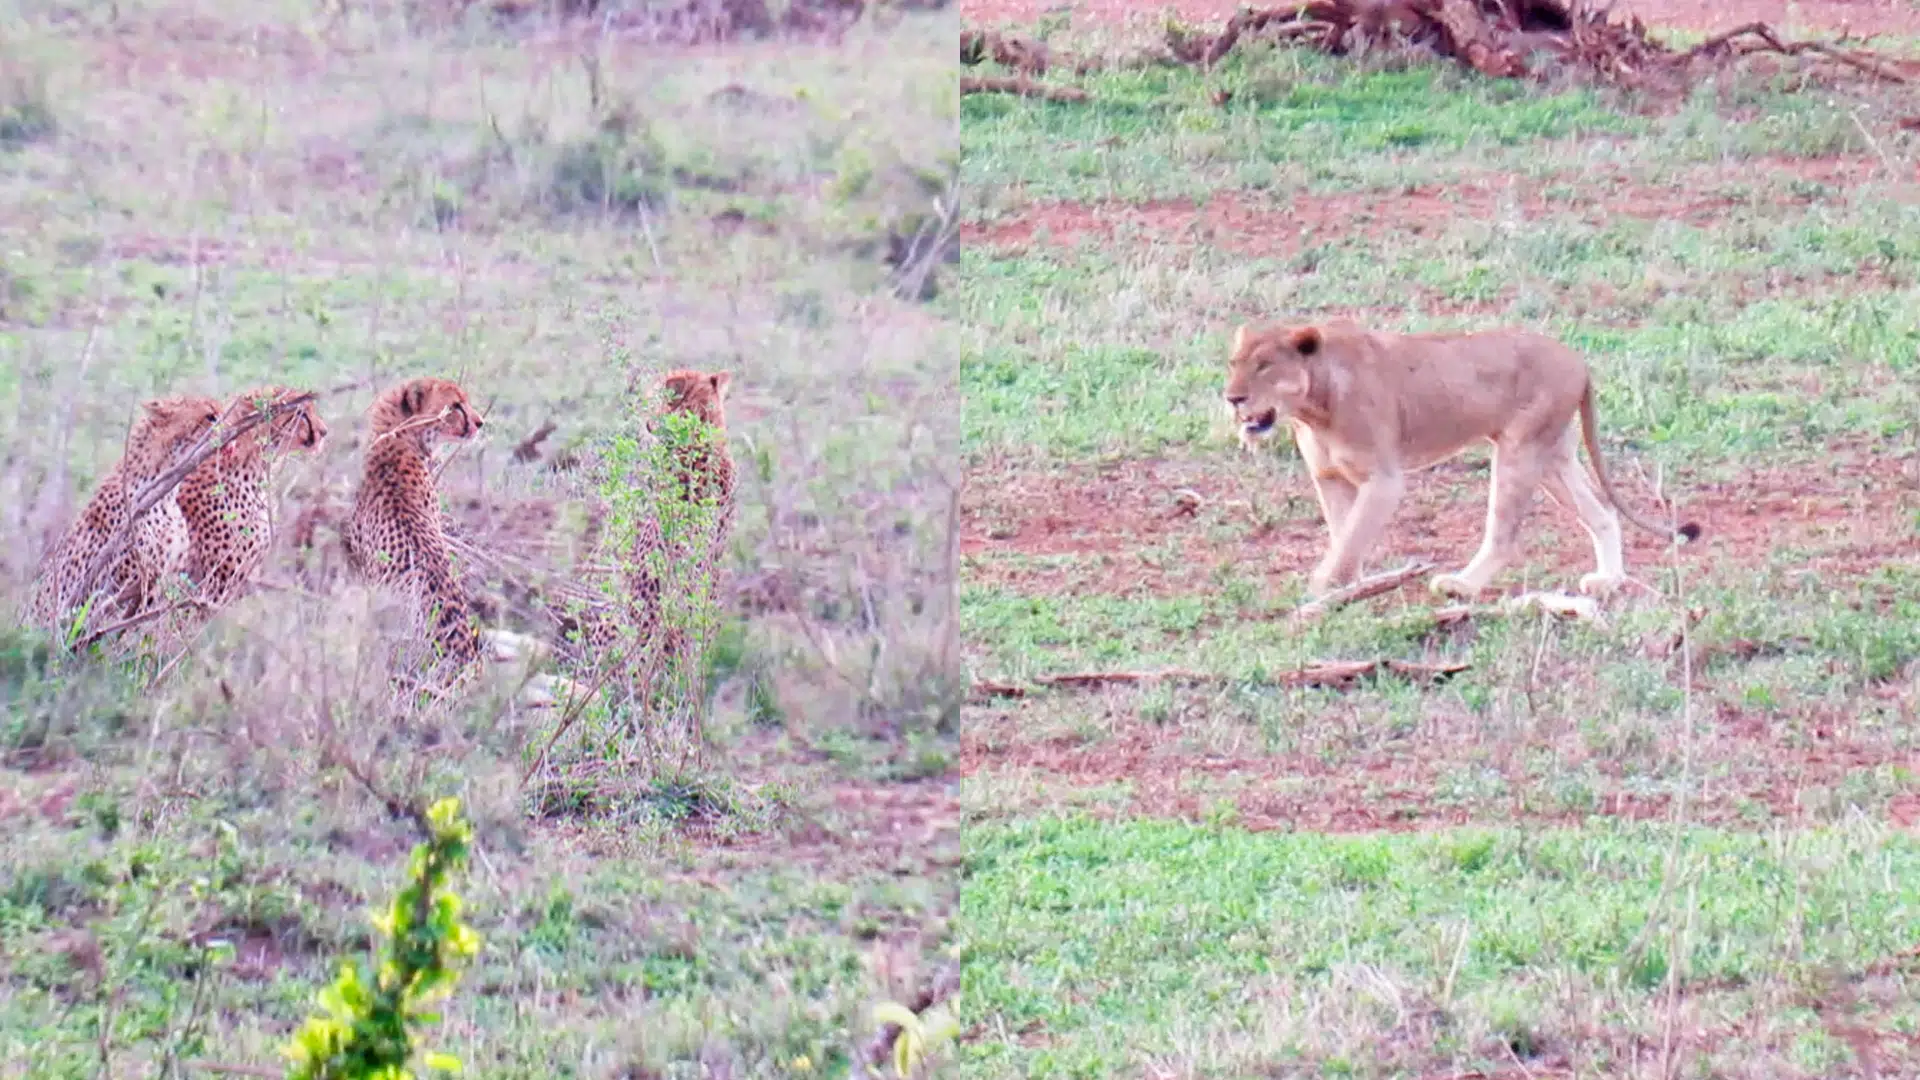 1 Lioness Steals Impala from 5 Cheetahs